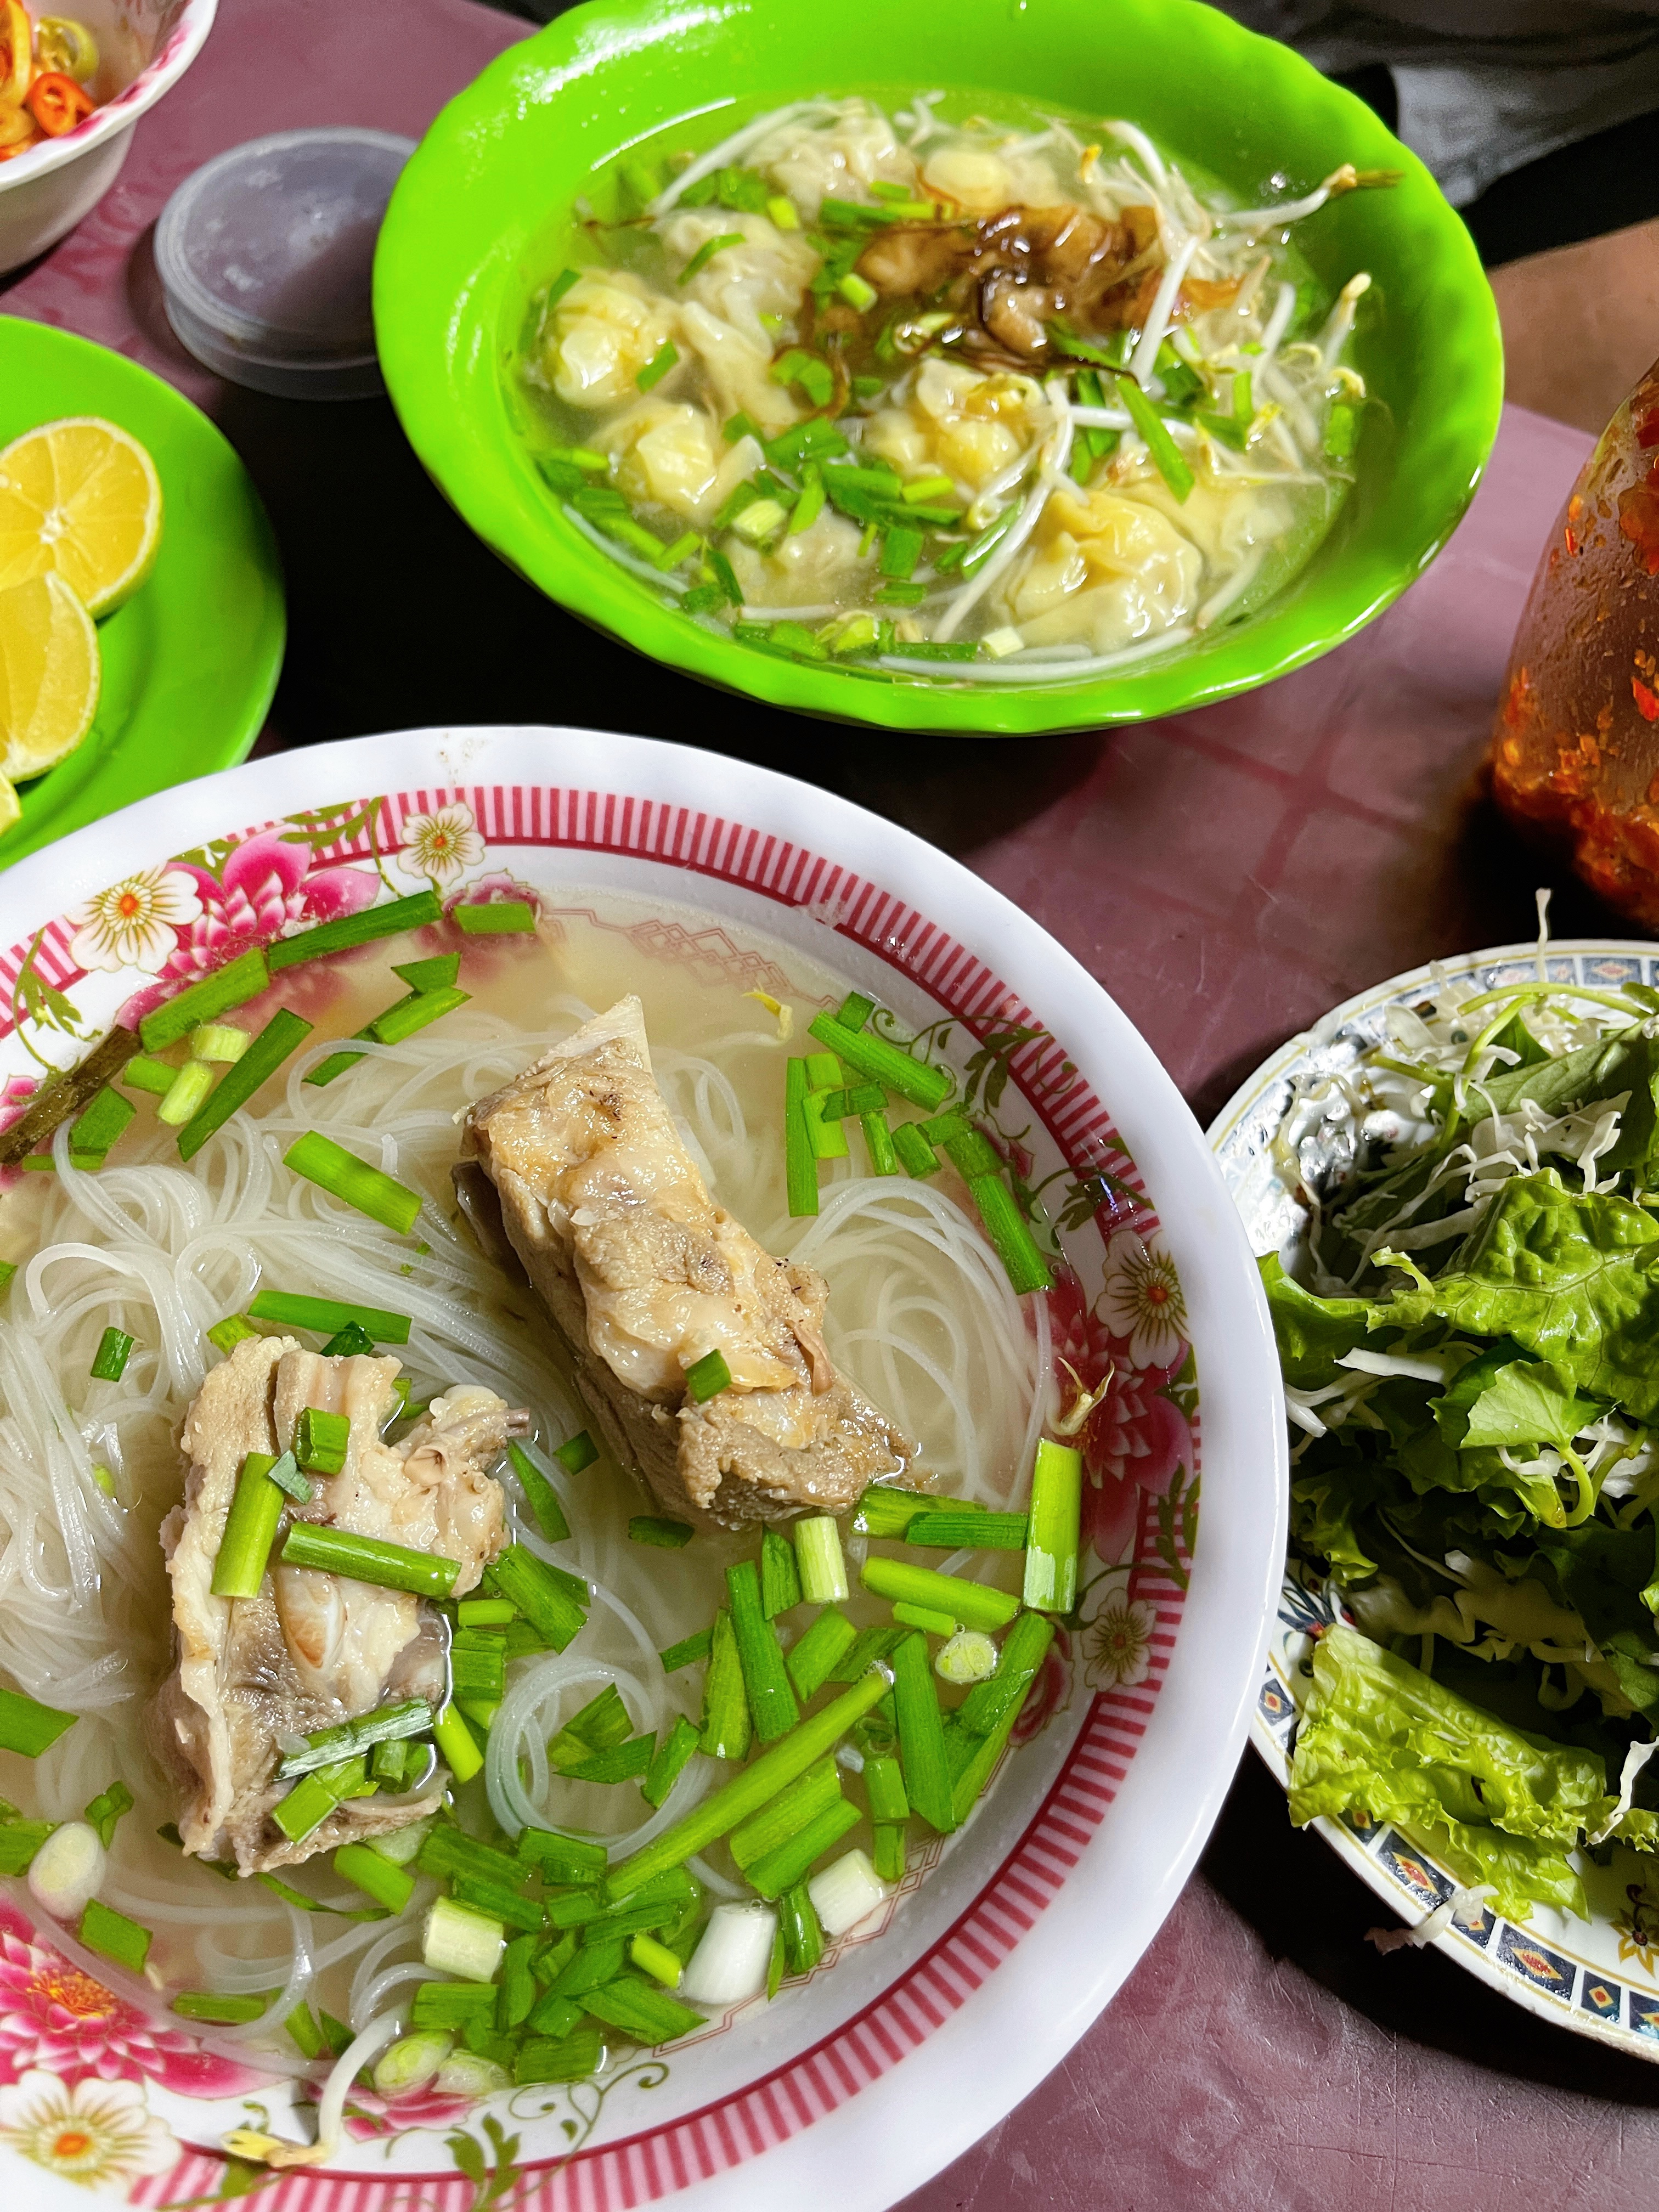 'Hu tieu' is one of the most popular street foods in Saigon. Photo: Dong Nguyen / Tuoi Tre News